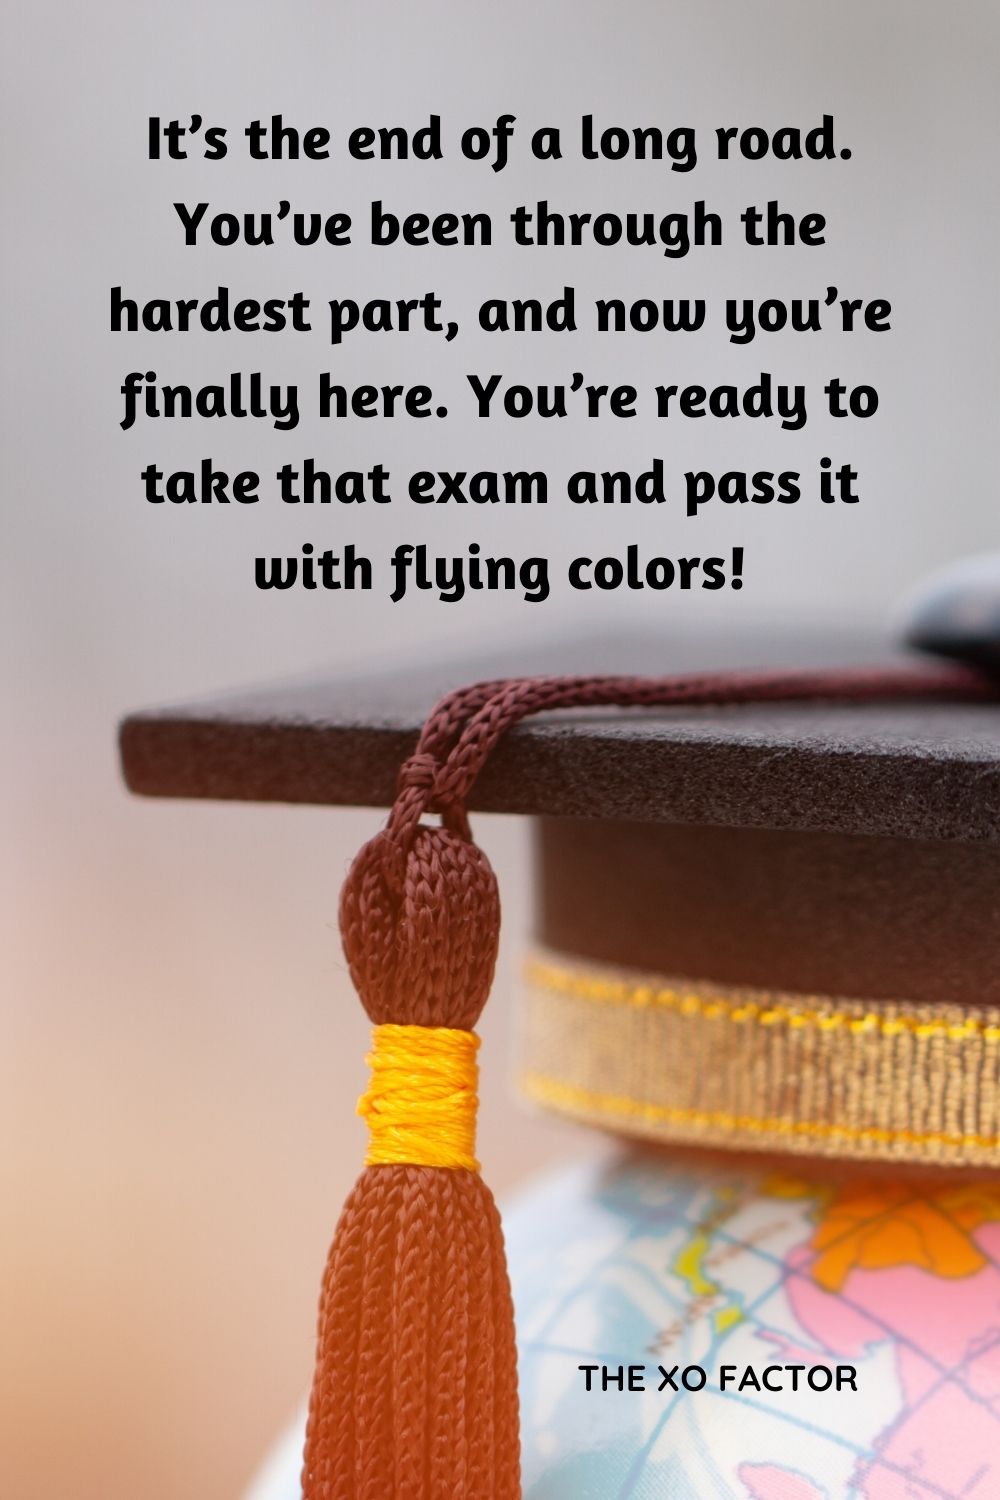 It’s the end of a long road. You’ve been through the hardest part, and now you’re finally here. You’re ready to take that exam and pass it with flying colors!